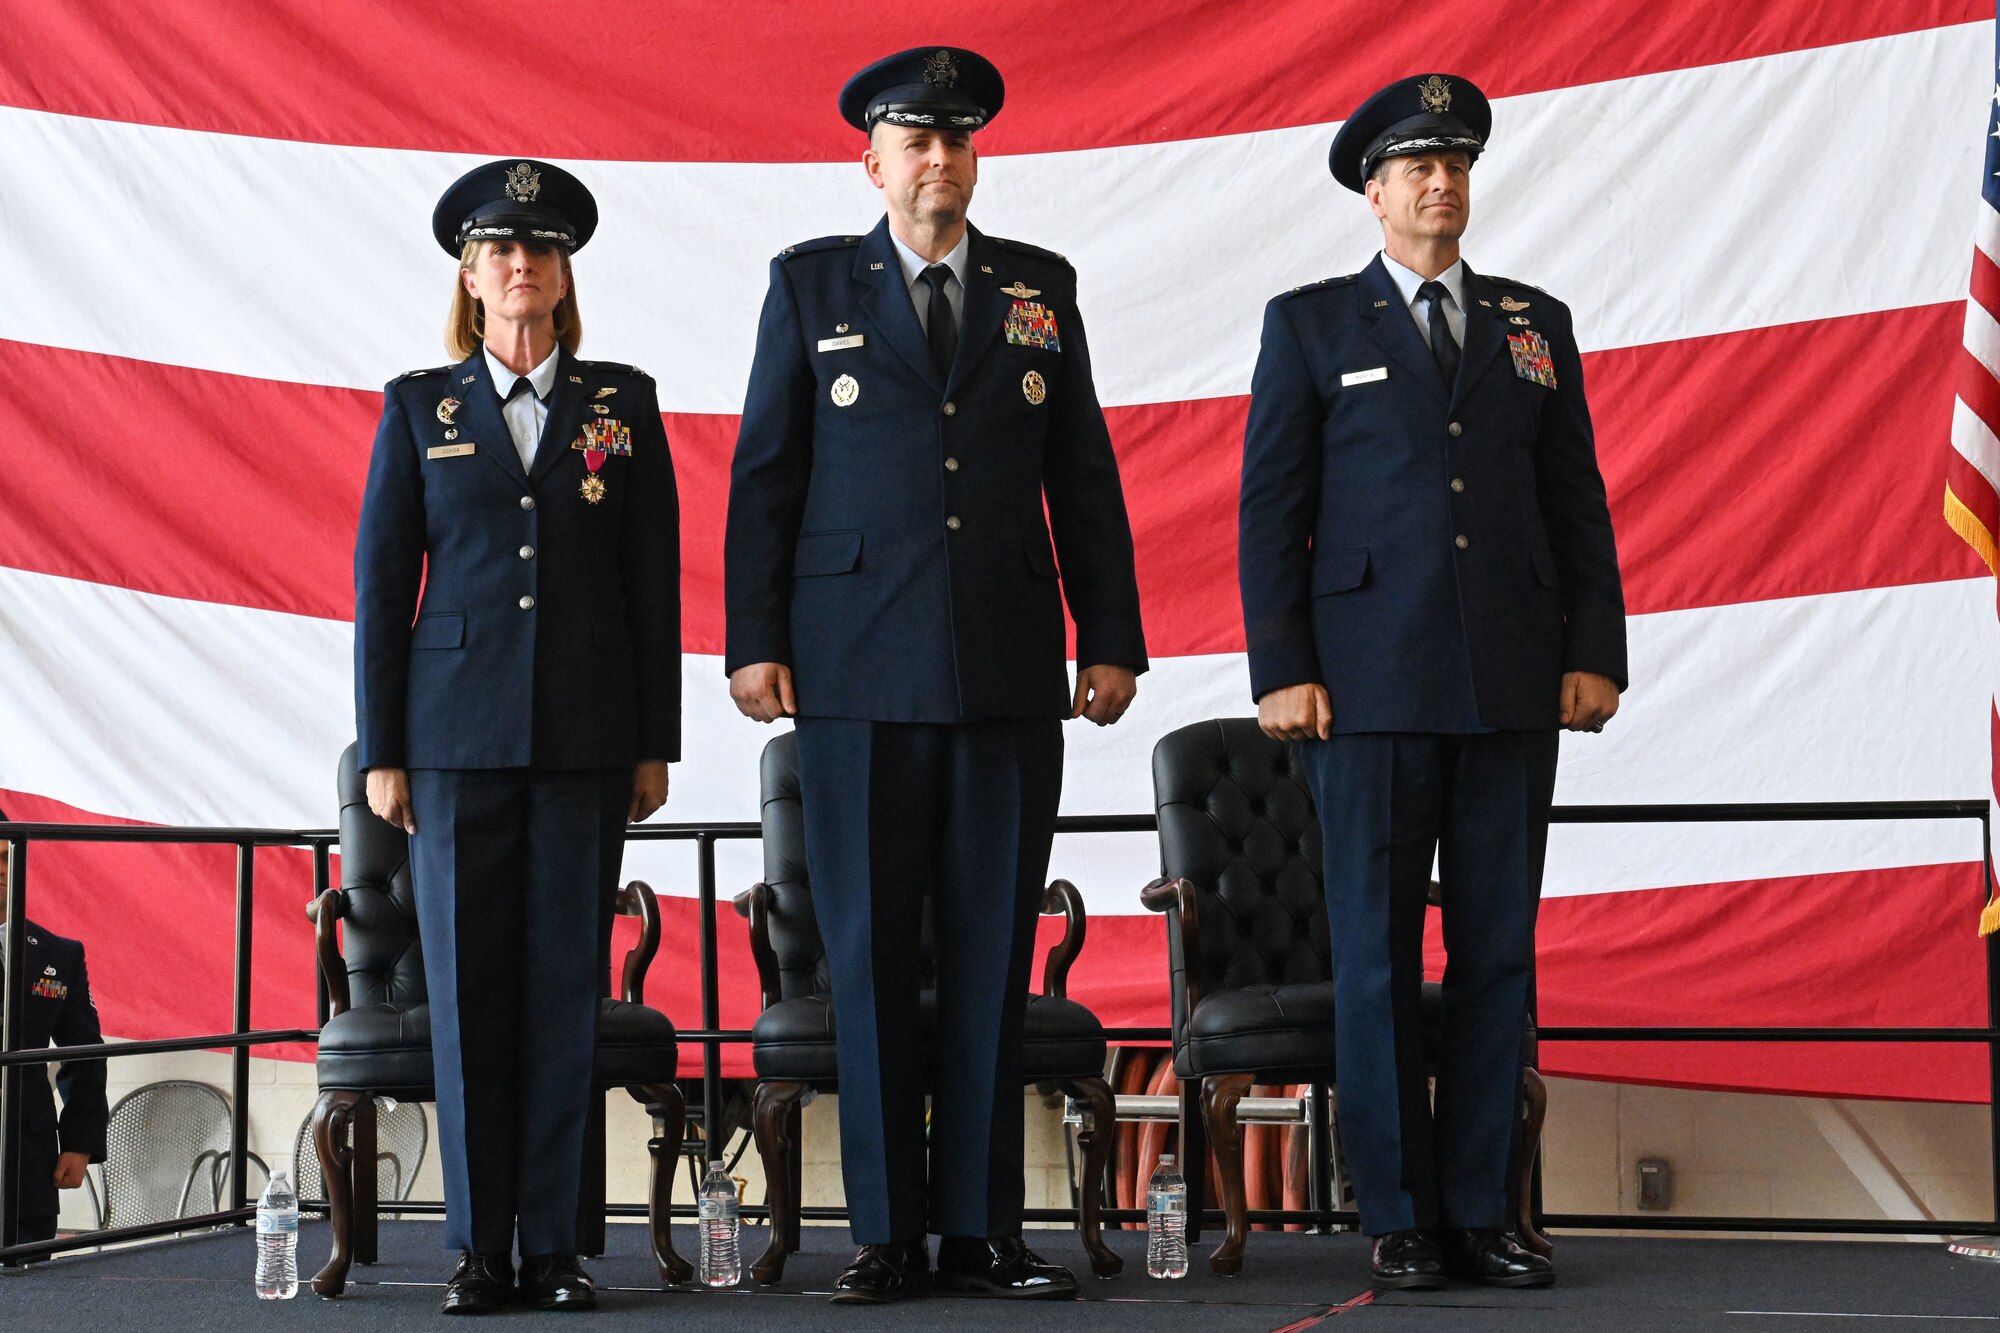 Airmen from the 19th Airlift Wing participate in a change of command ceremony in an airplane hangar